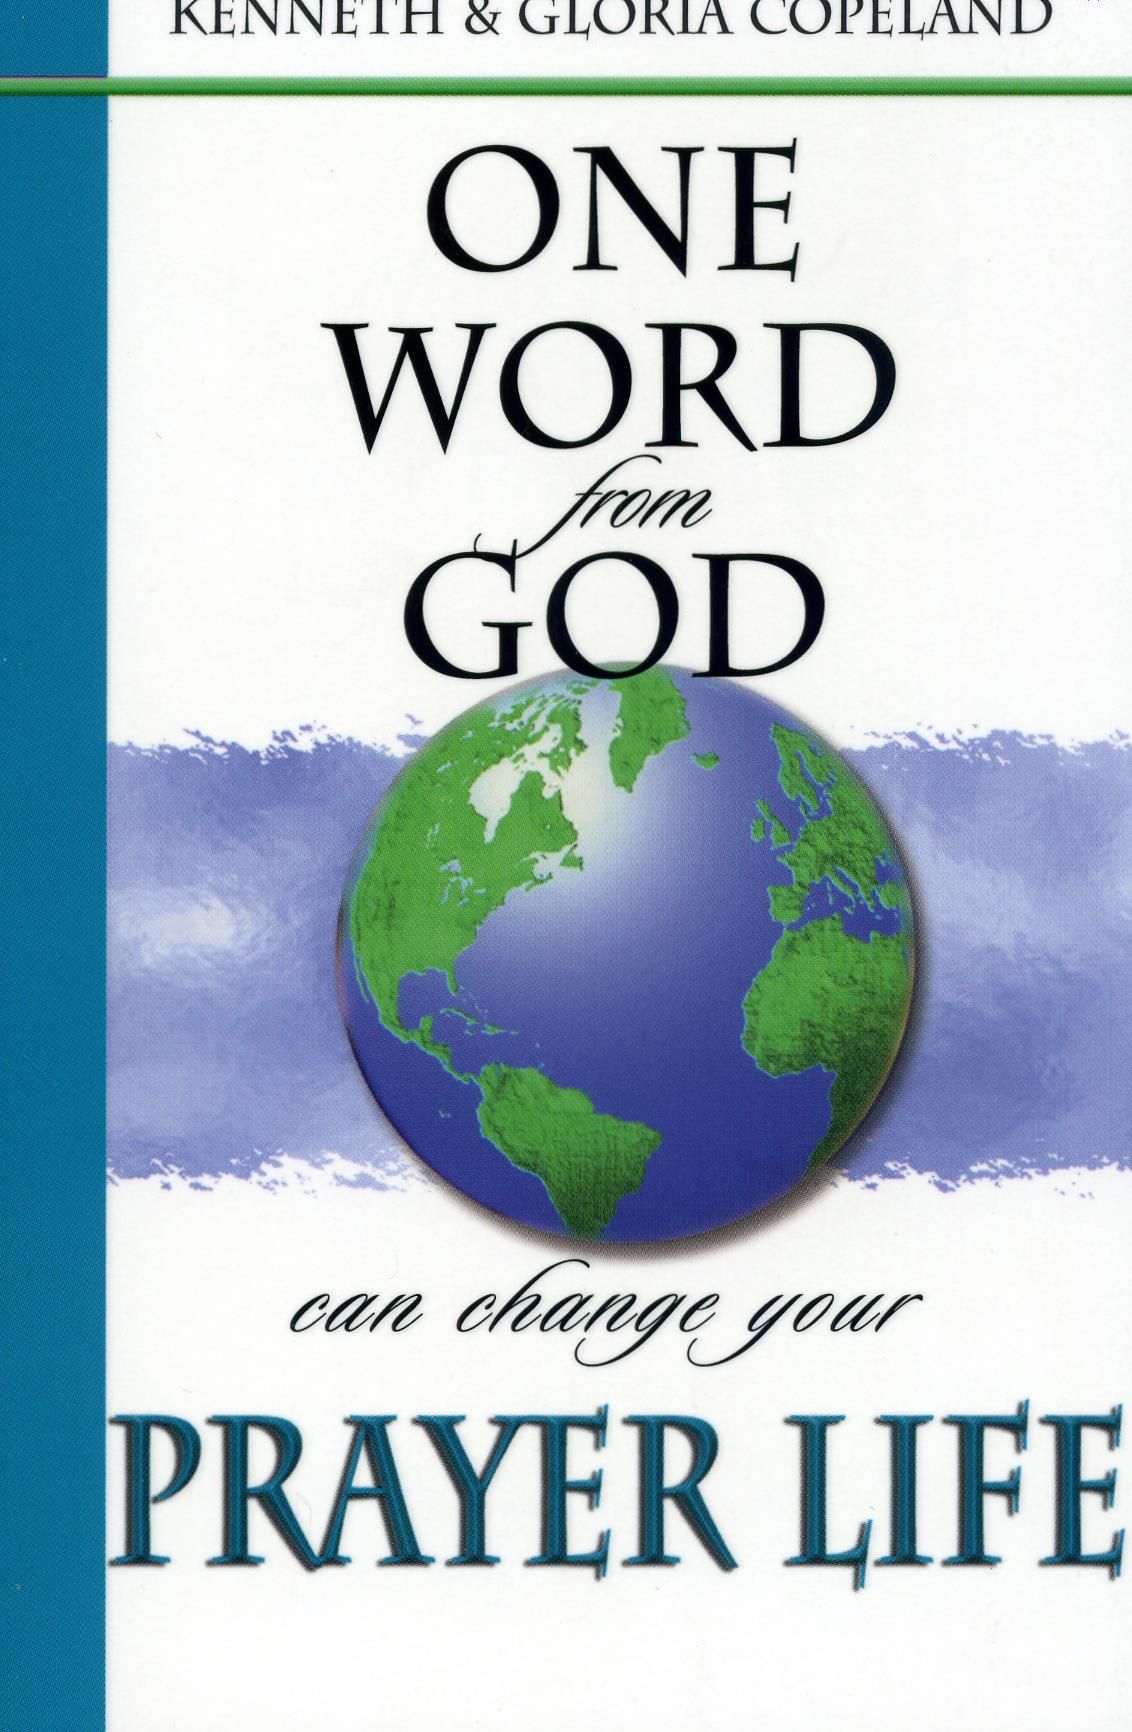 K. & G. Copeland: One Word from God can change your Prayer Life